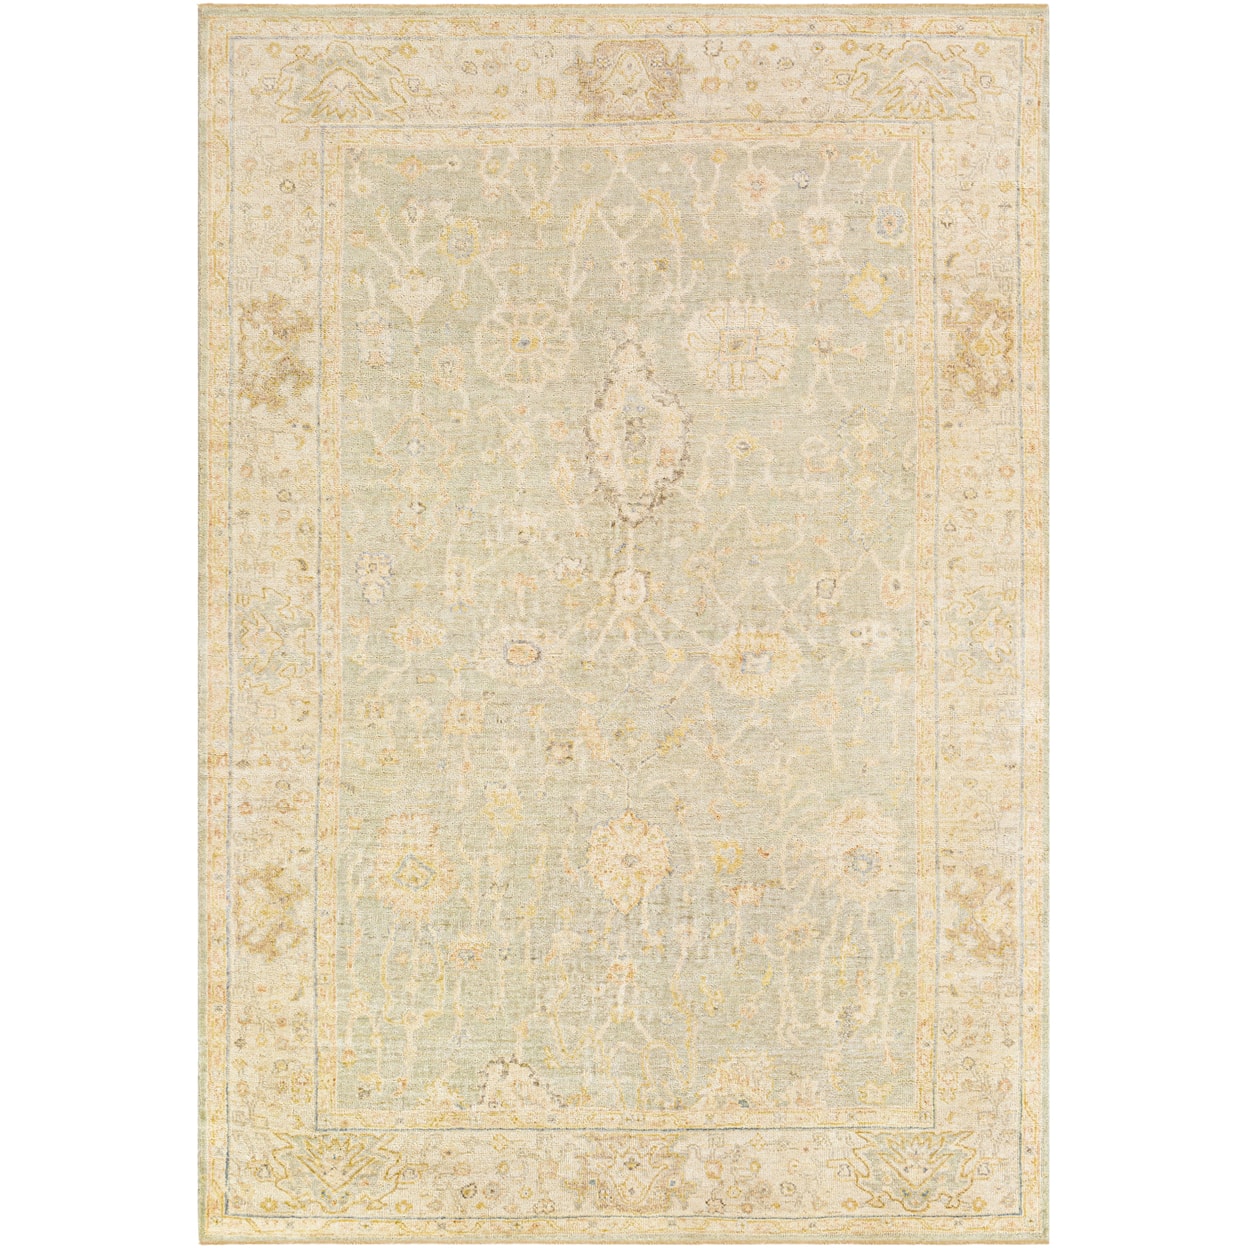 Ruby-Gordon Accents Normandy Rugs